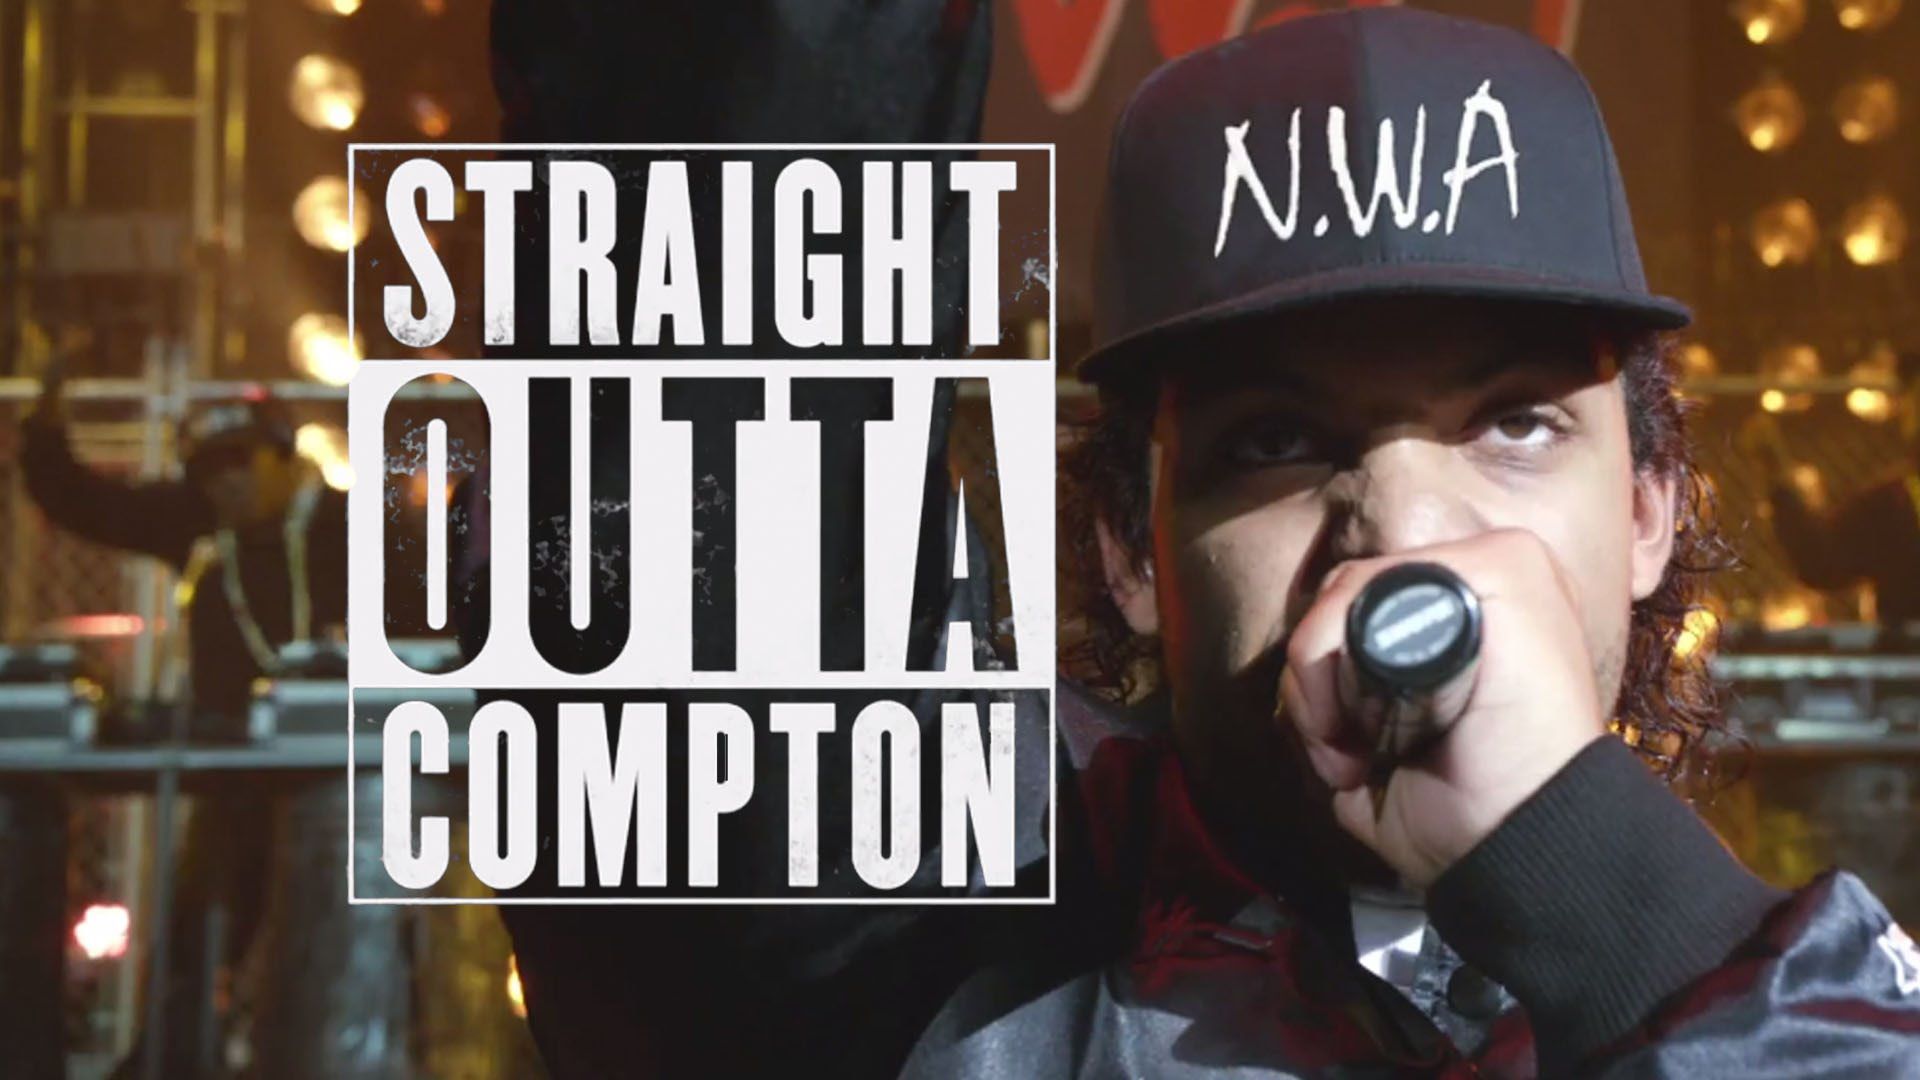 Straight Outta Compton' Movie Review - Video | U92 | Cuzimage